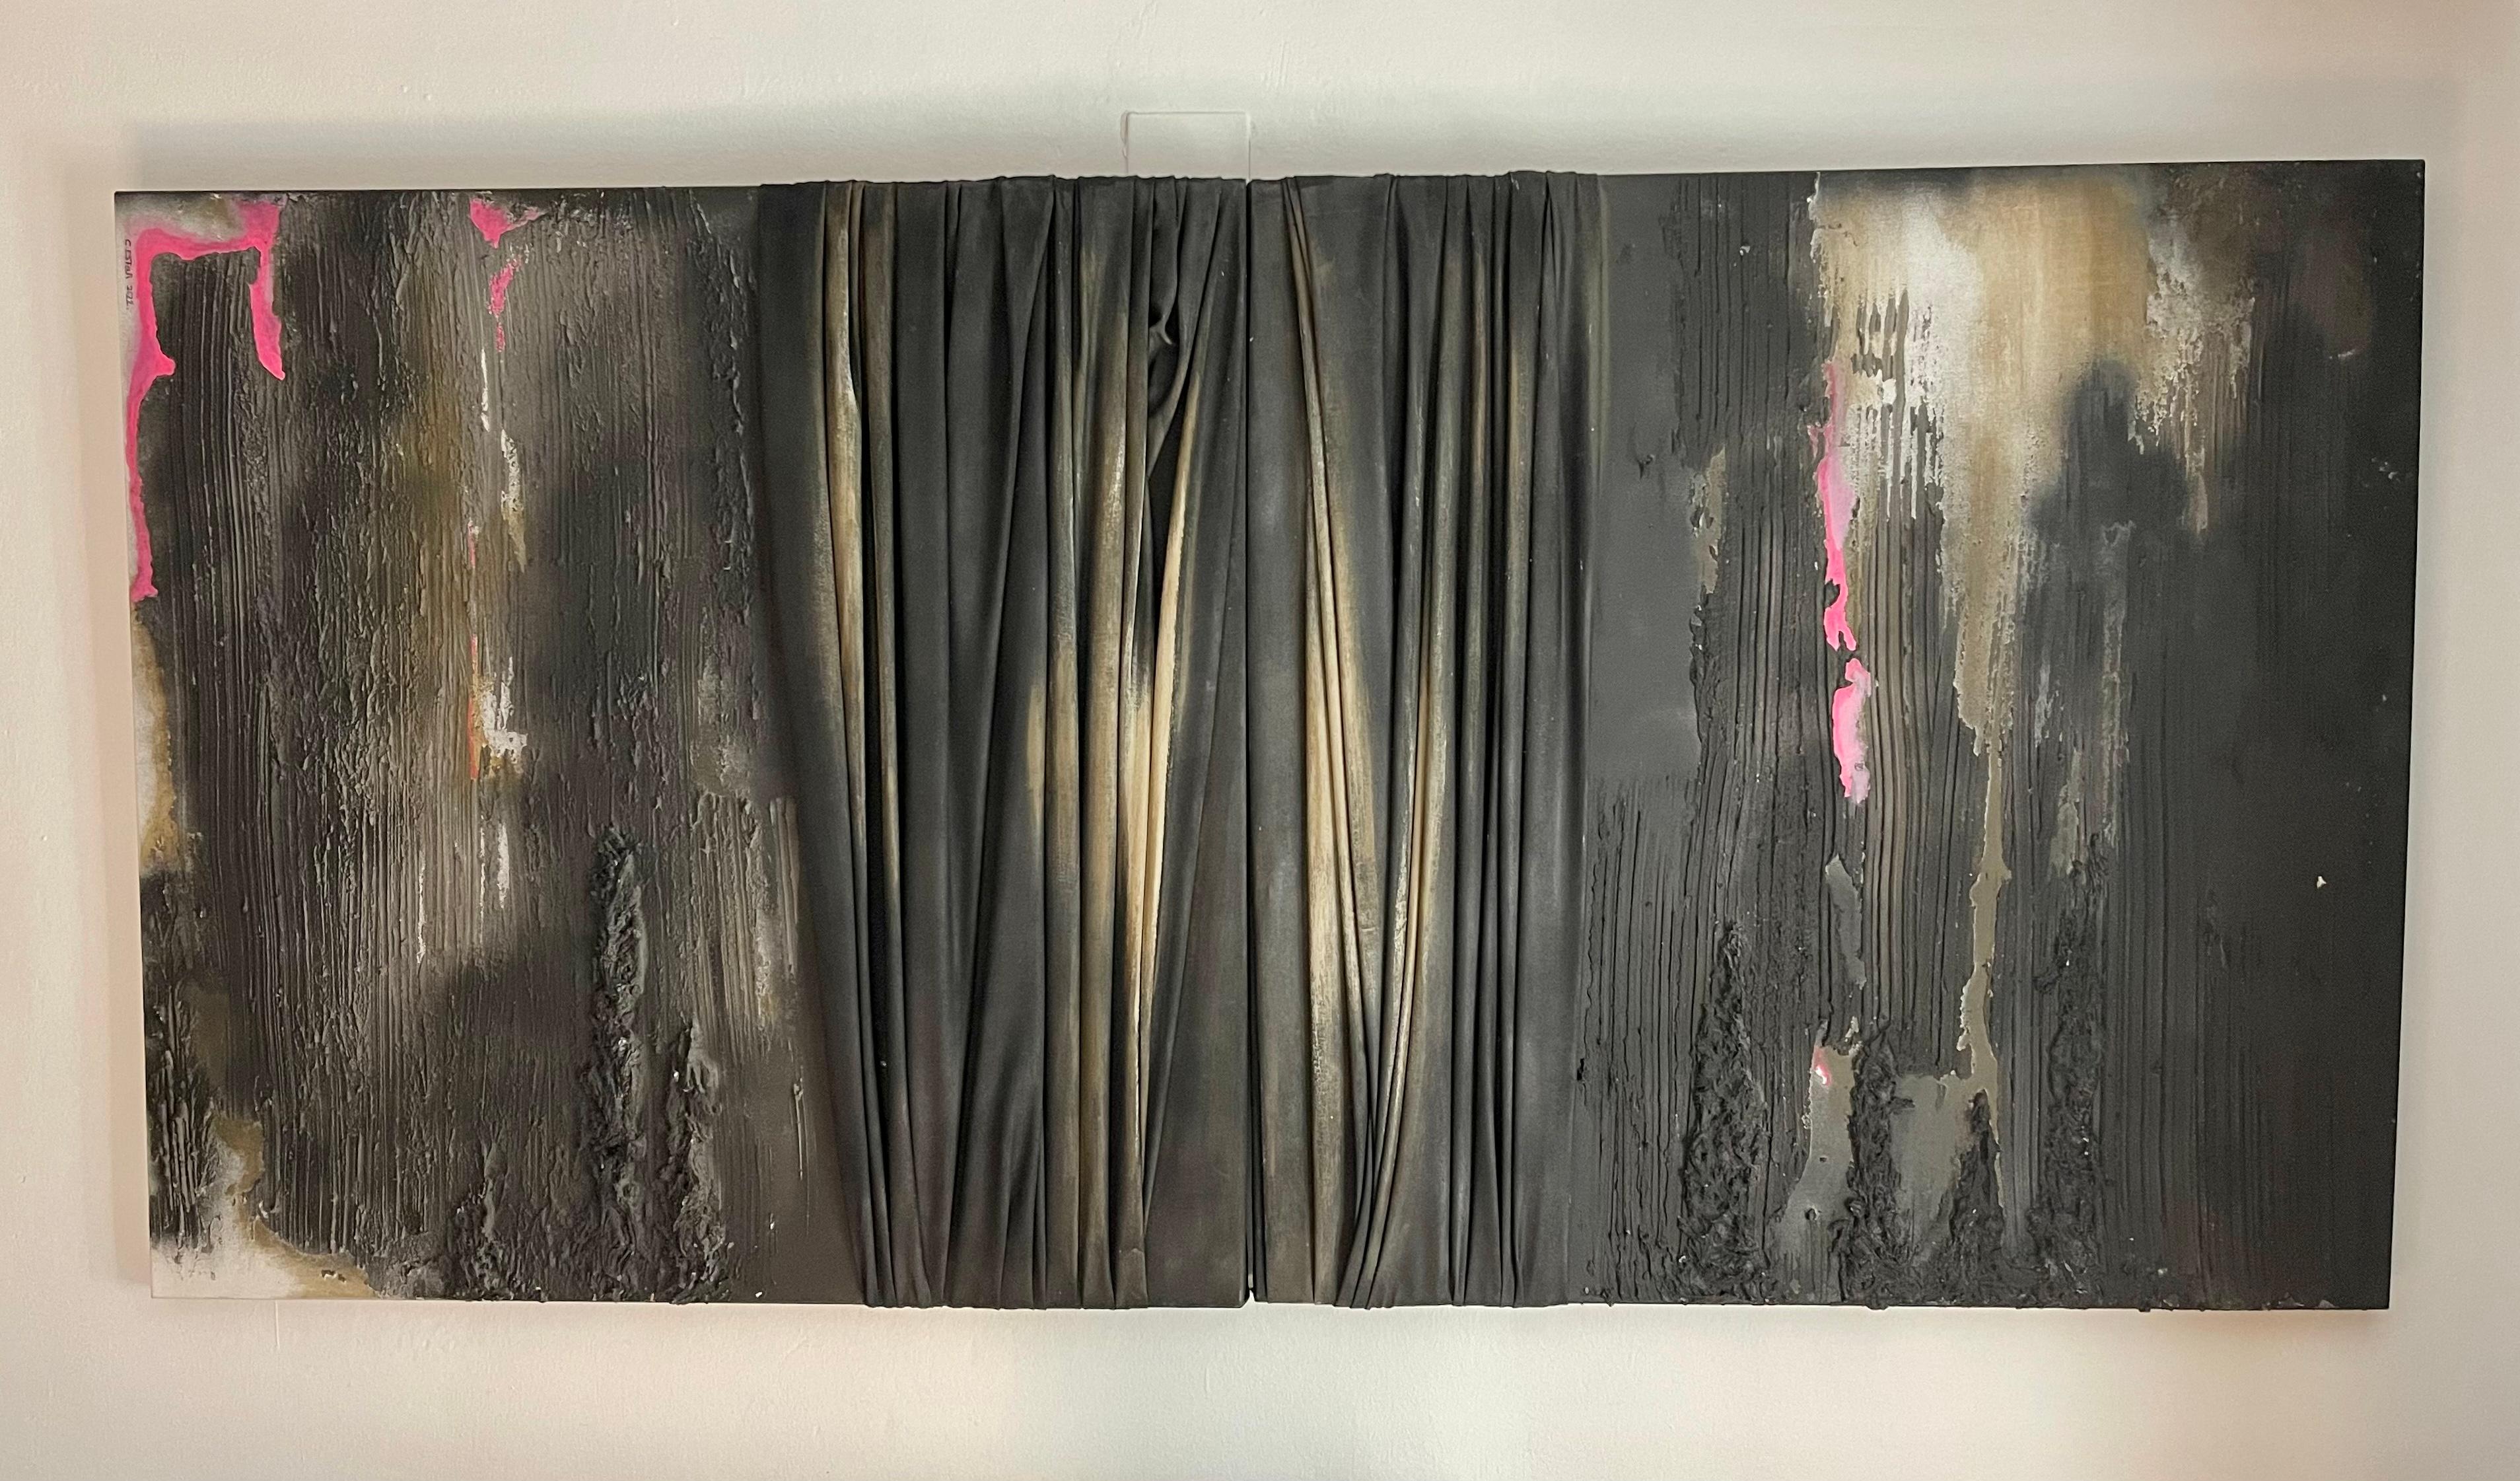 Diptych Contemporary Abstract Collage Mix Fabric, Black, Pink and Beige Color - Mixed Media Art by Cristina Estañ